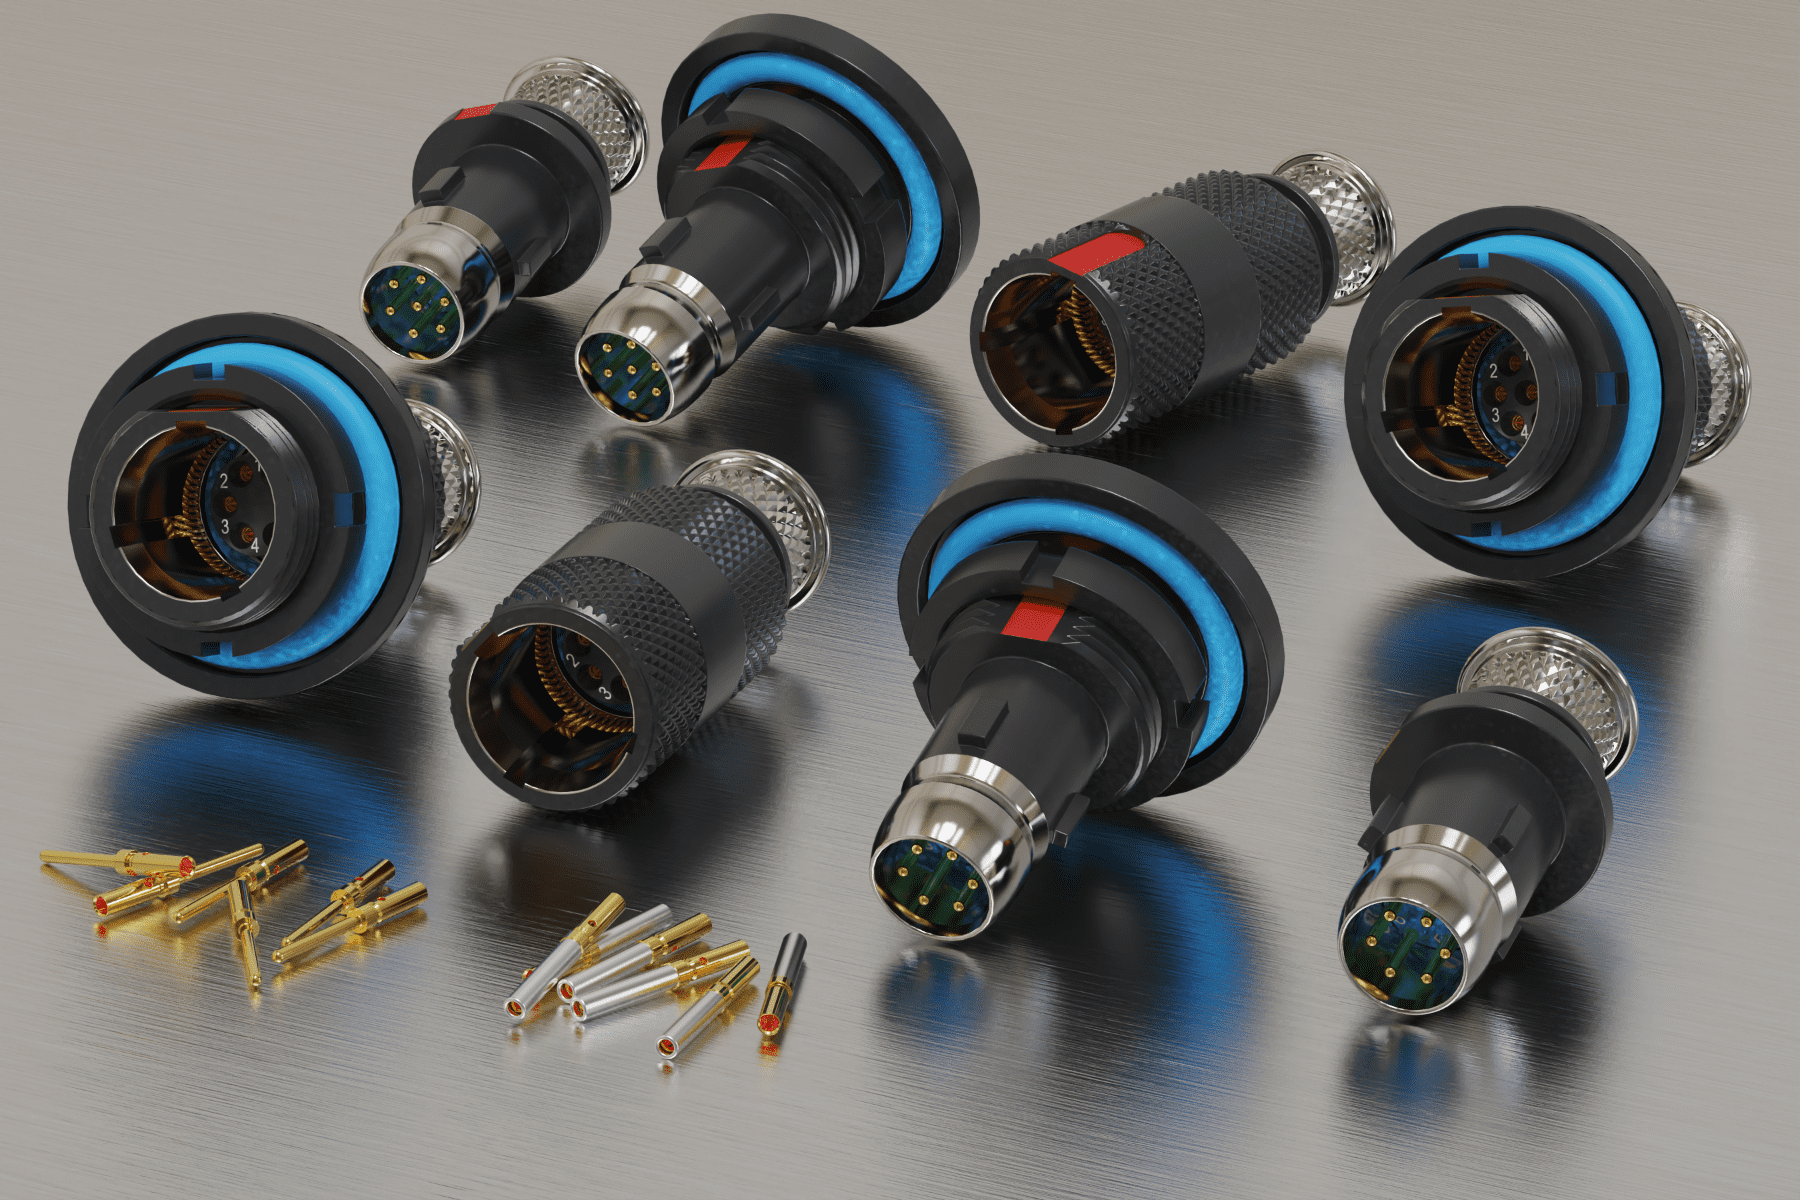 Omnetics Connector Corporation developed the Kilo 360 Warrior Series Connectors to provide interoperability between various forces using equipment with micro miniature 38999 interconnects. New 10 Amp receptacles are available for higher-current soldier battery charging, radio, and C4ISR equipment. 